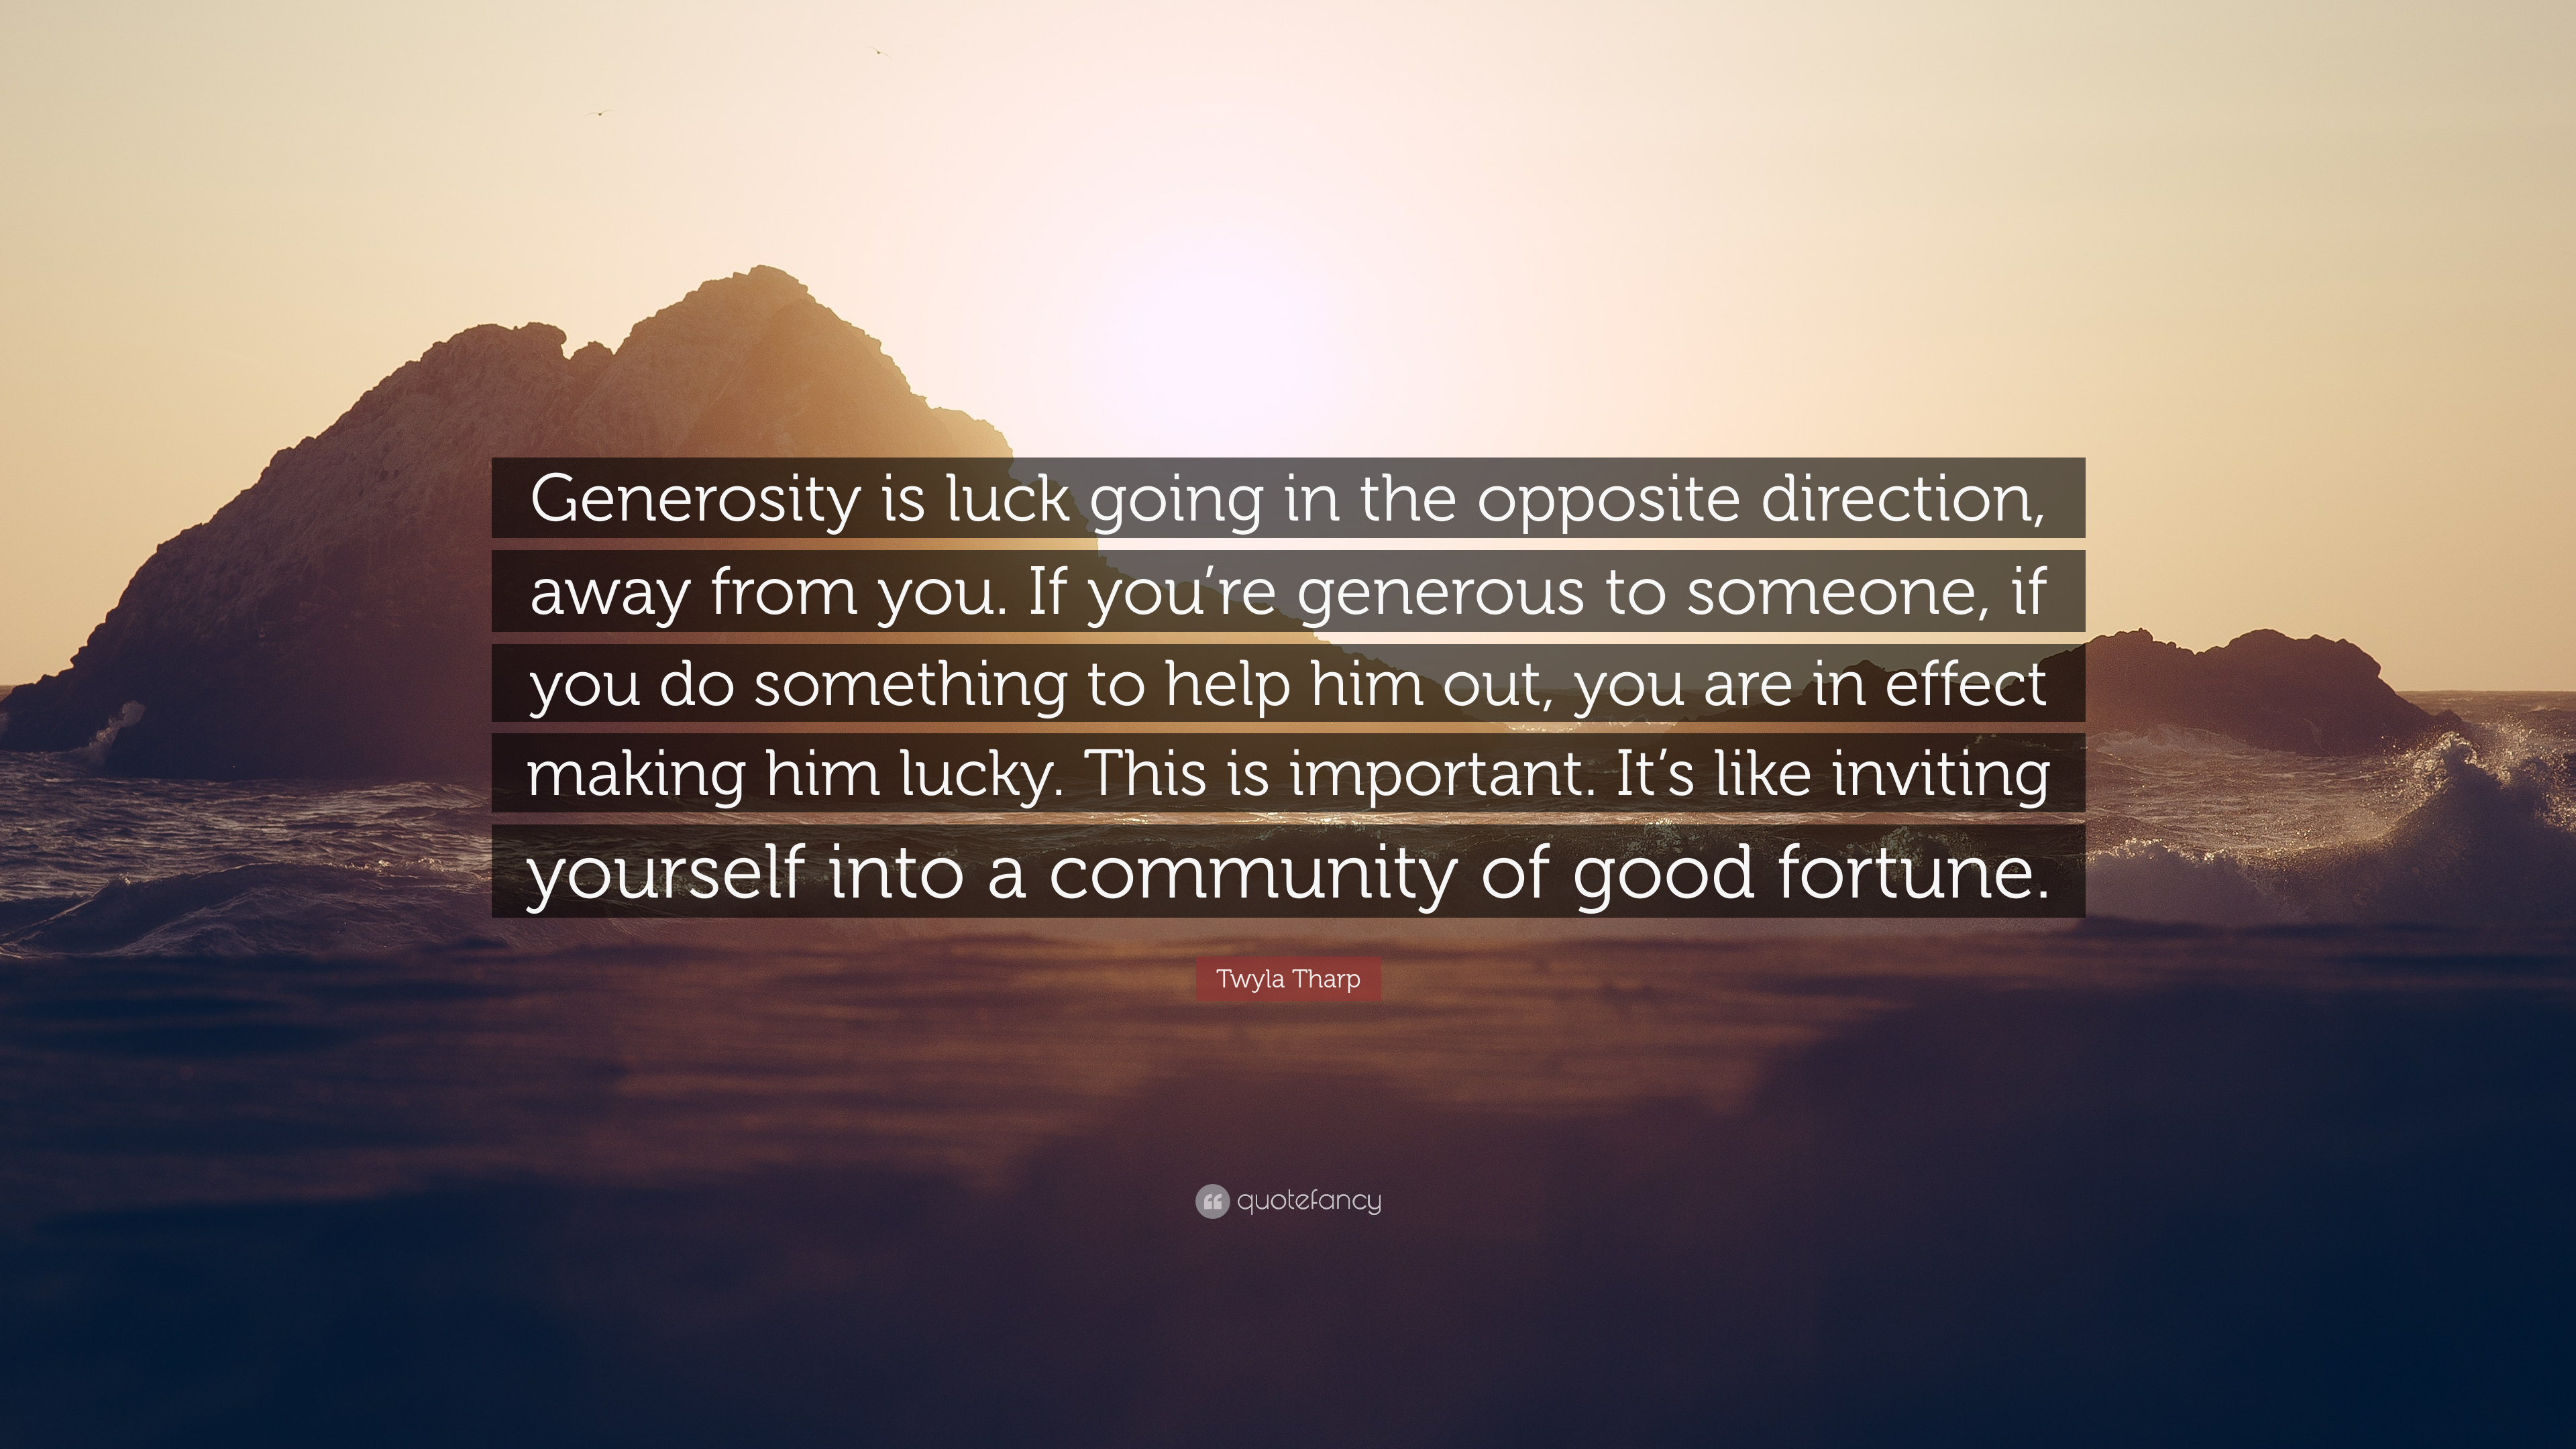 Twyla Tharp Quote: “Generosity is luck going in the opposite direction, away from you. If you're generous to someone, if you do something to.”